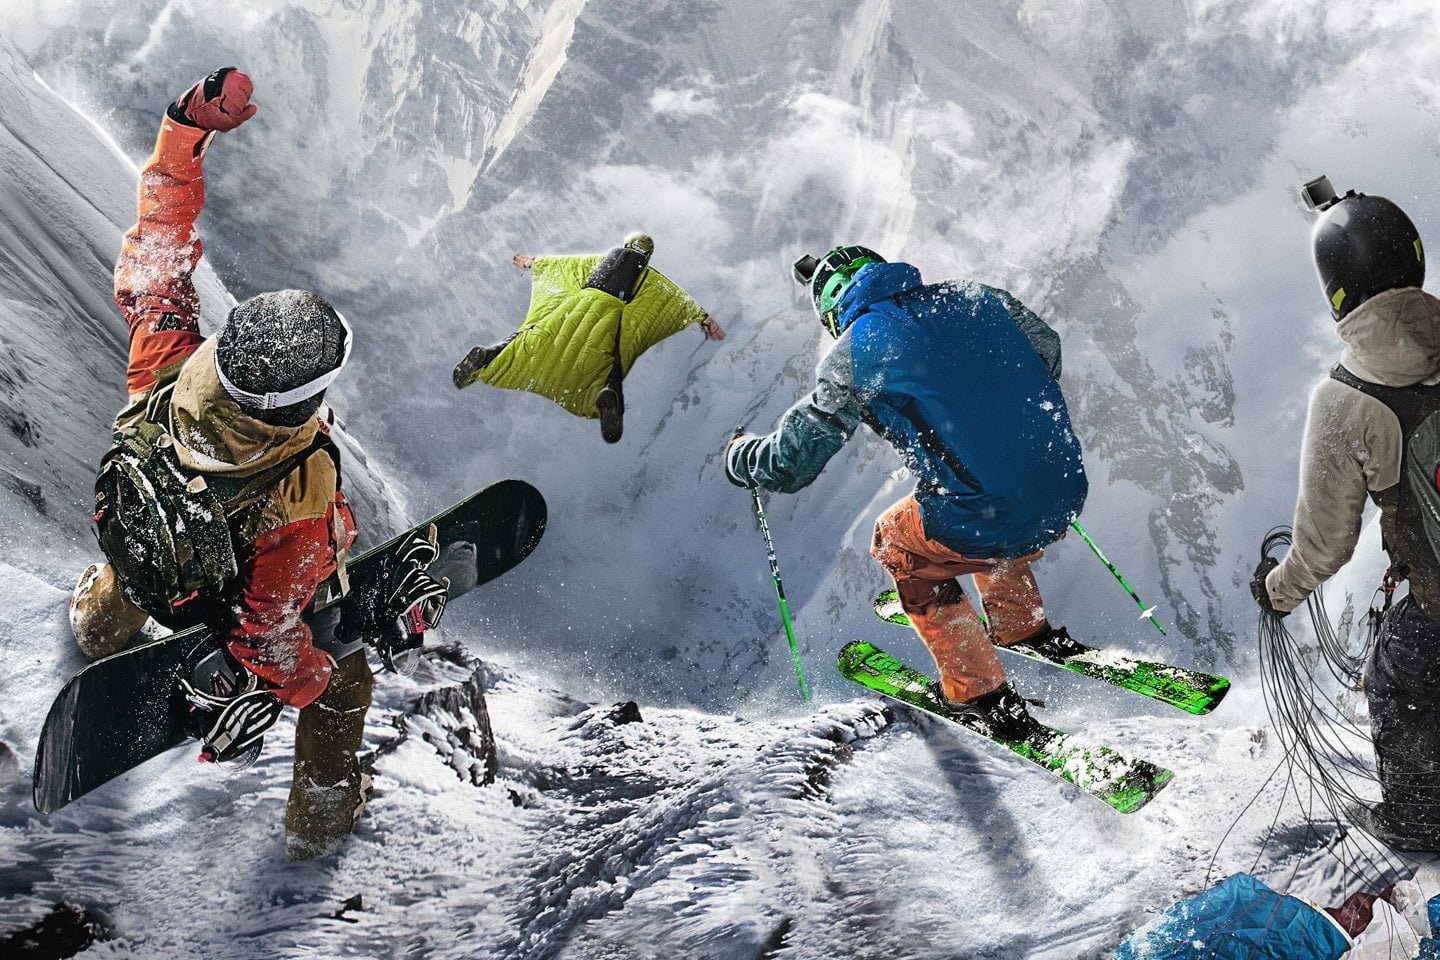 Review – Steep